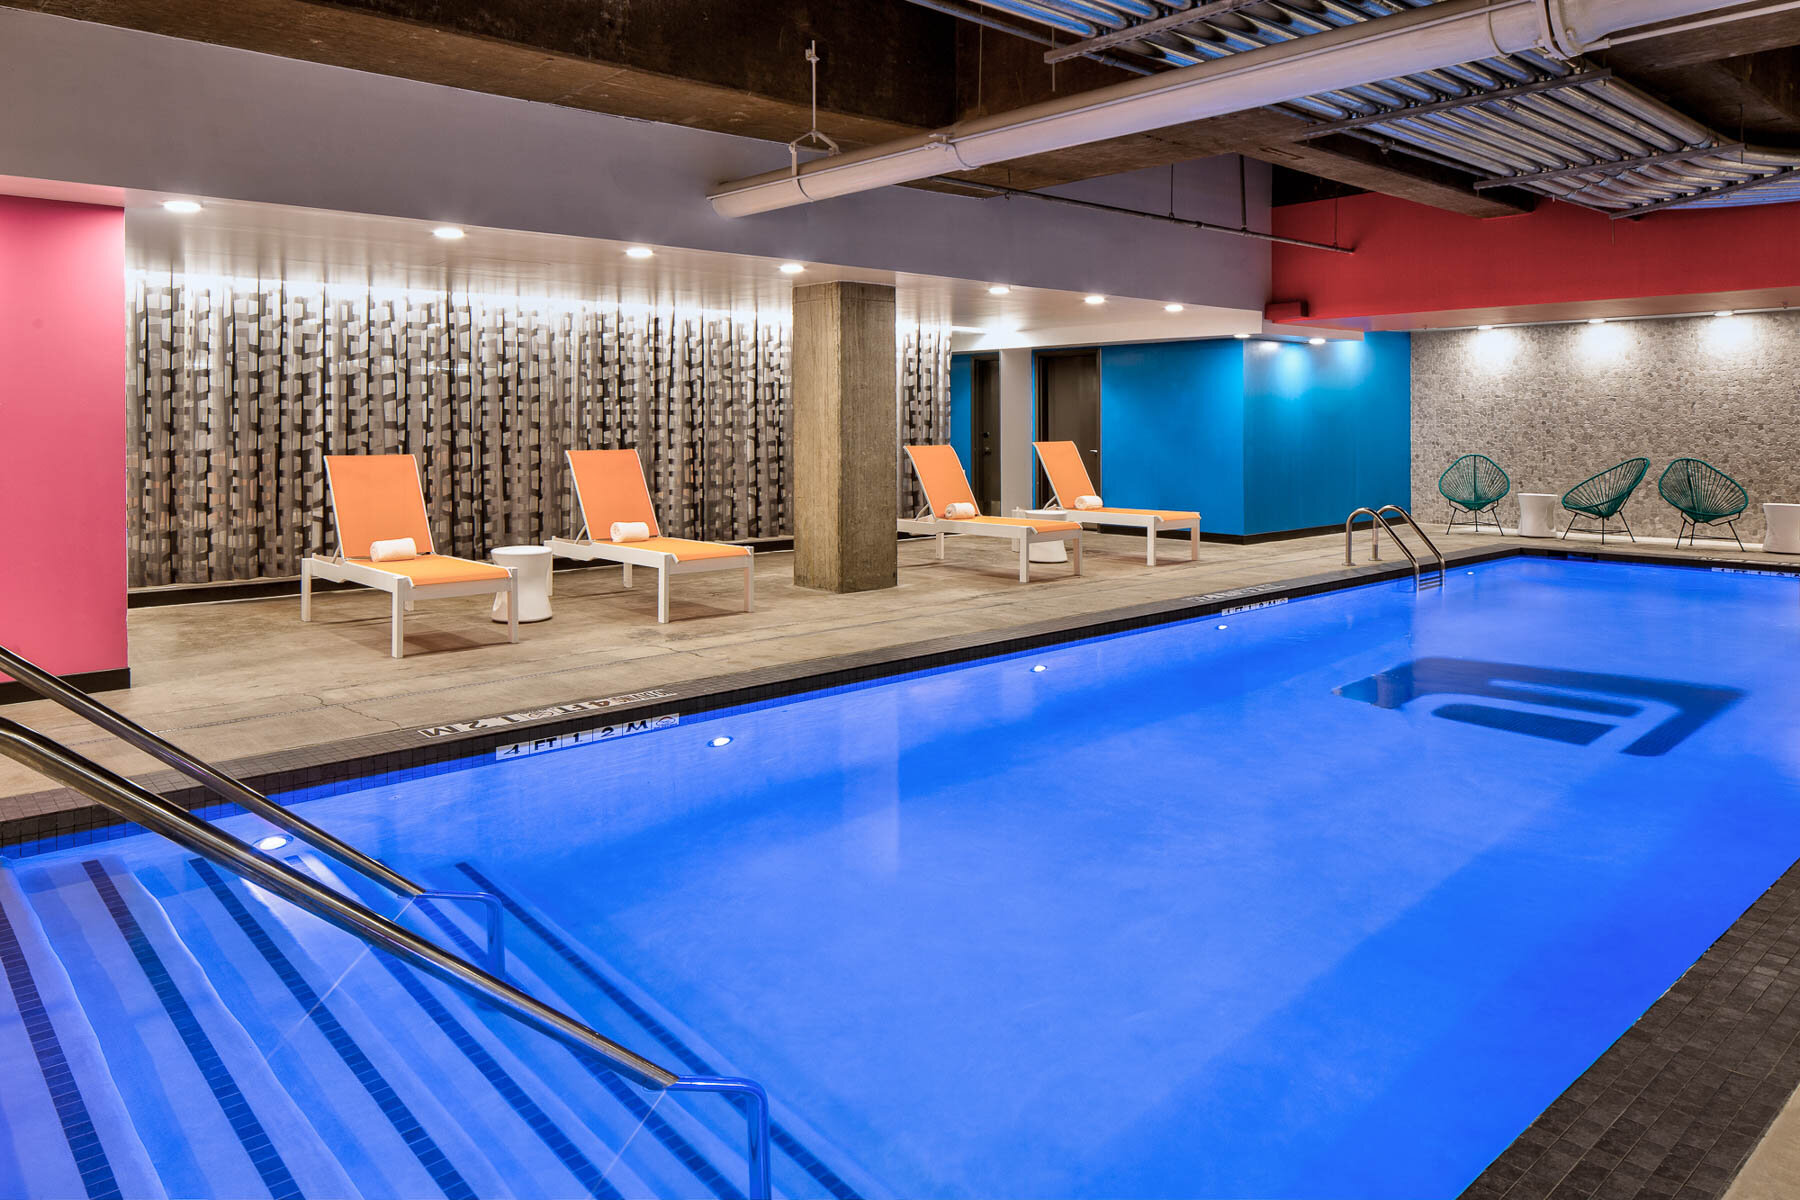 Indoor pool lined with orange lounge chairs